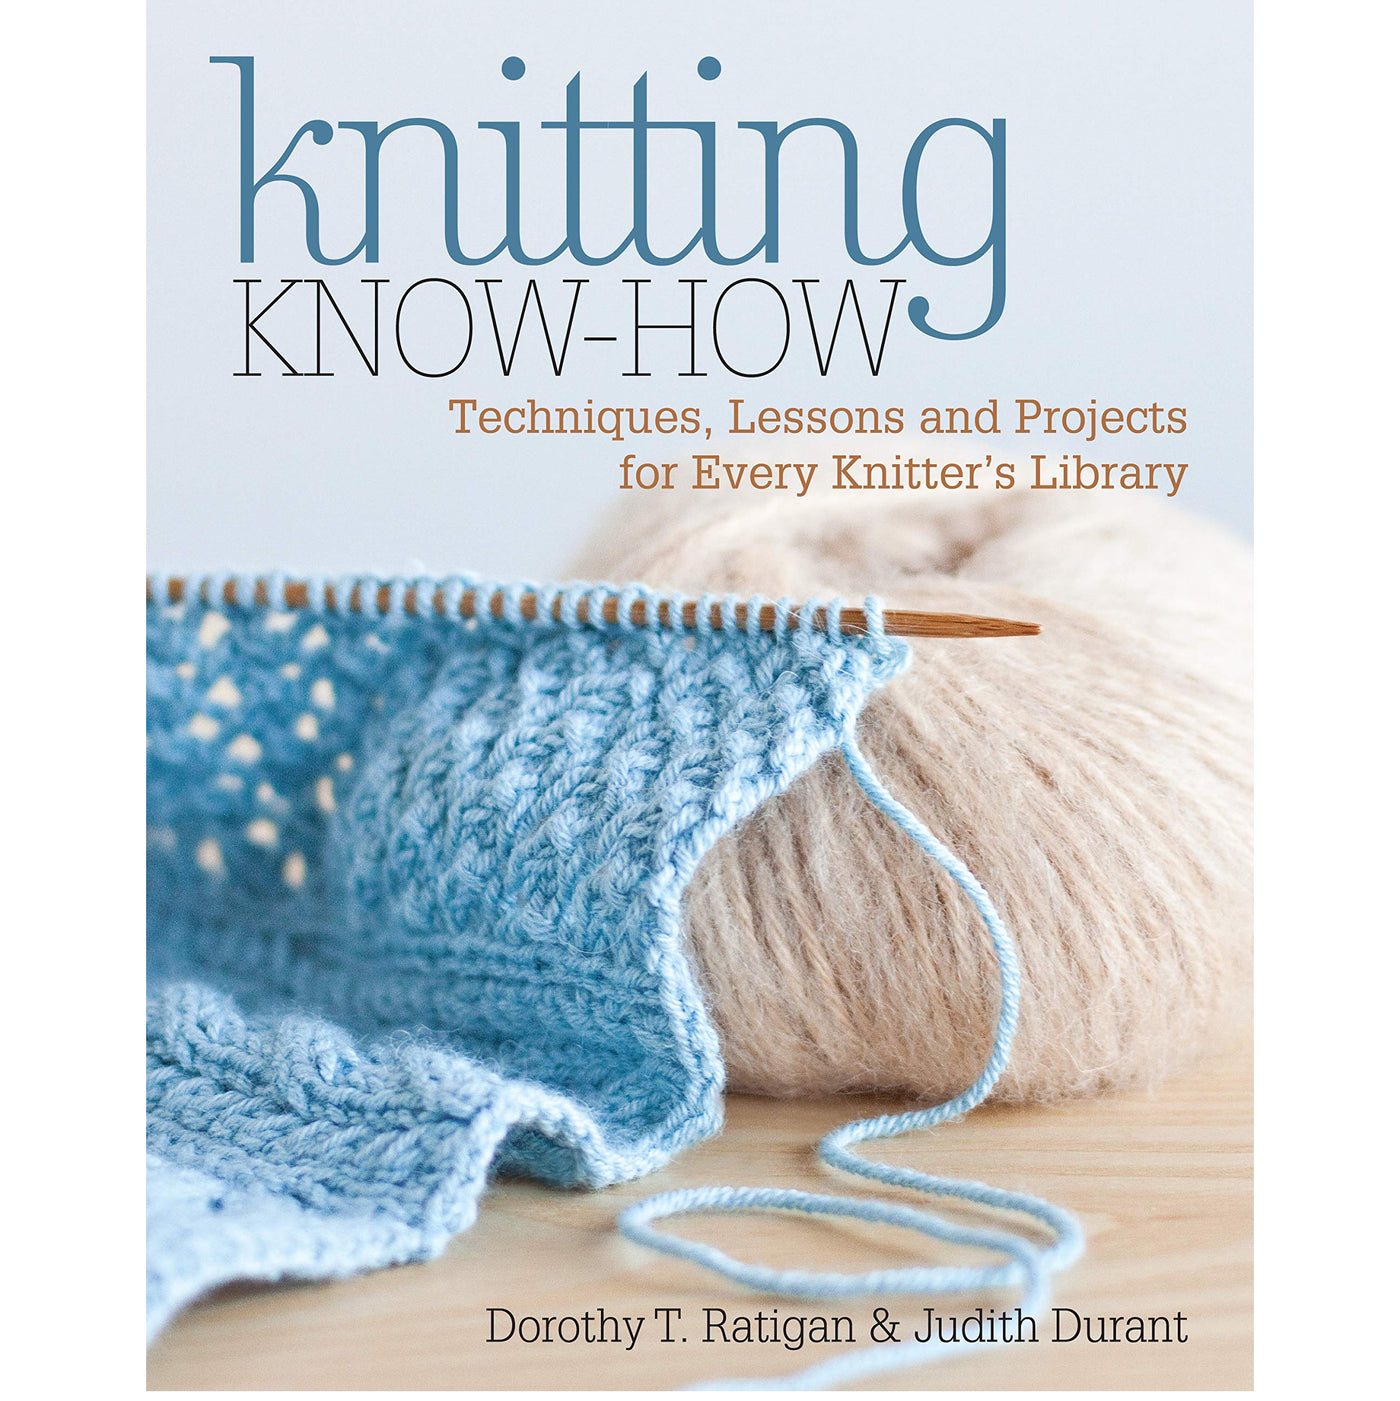 Knitting Know-How (Dorothy Ratigan and Judith Durant)